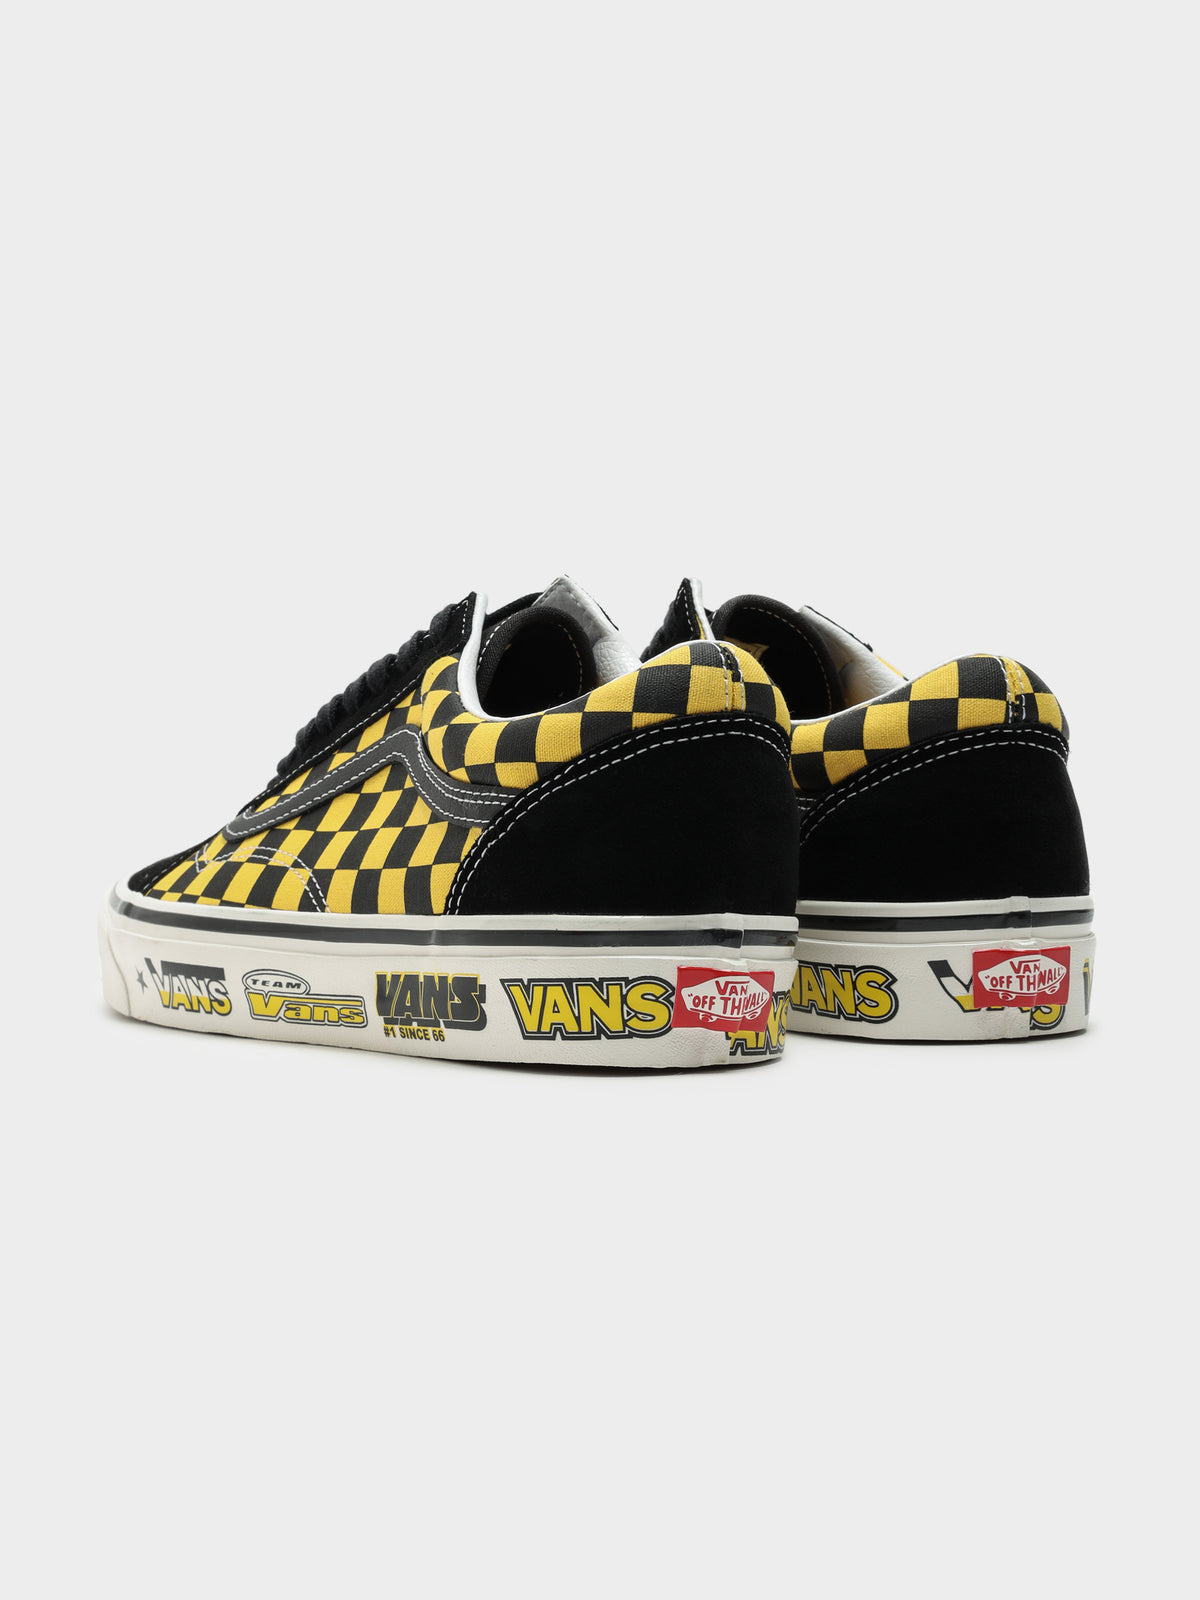 Unisex Anaheim Factory Old Skool 36 DX Sneakers in Freestyle Black &amp; Spectra Yellow